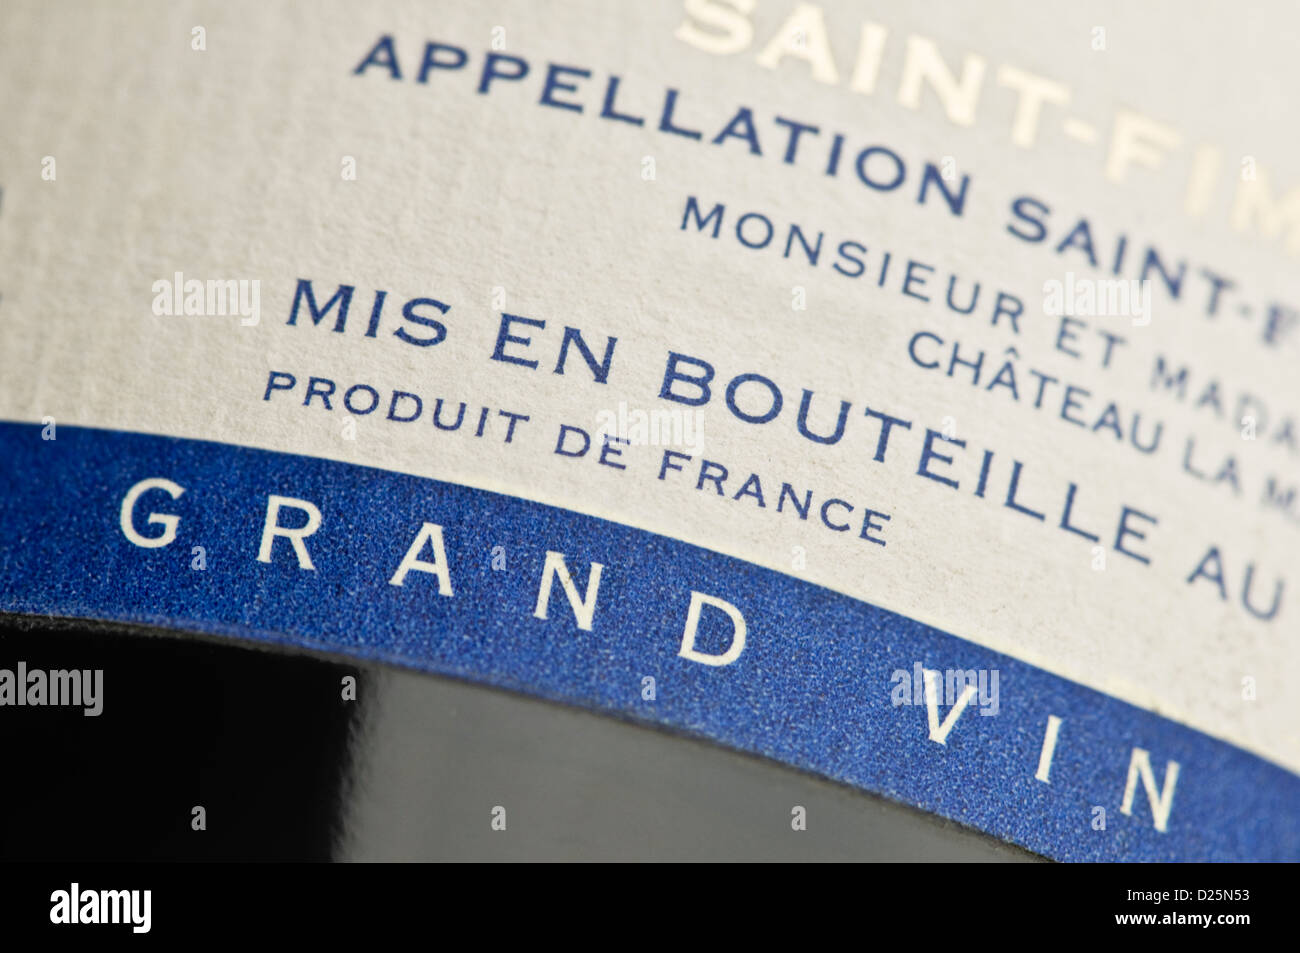 French red wine bottle label Stock Photo